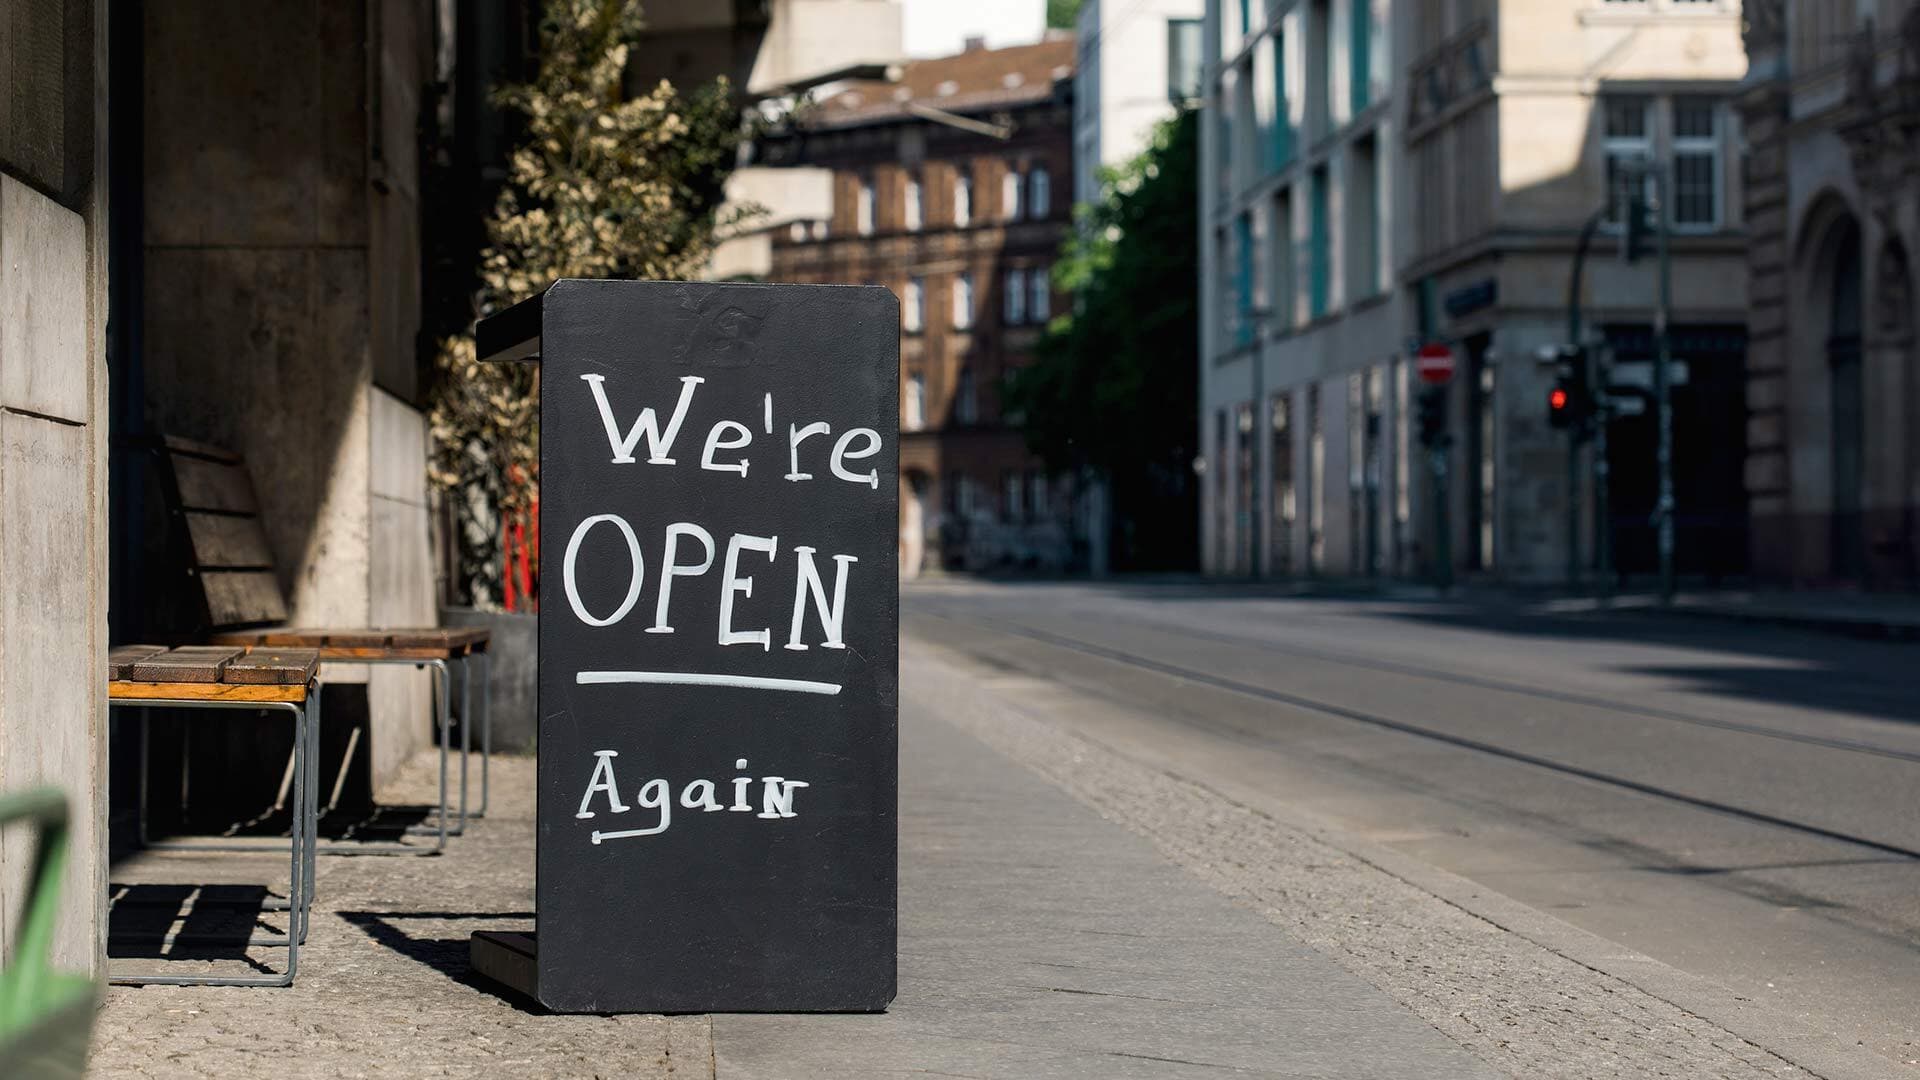 Open sign outside business